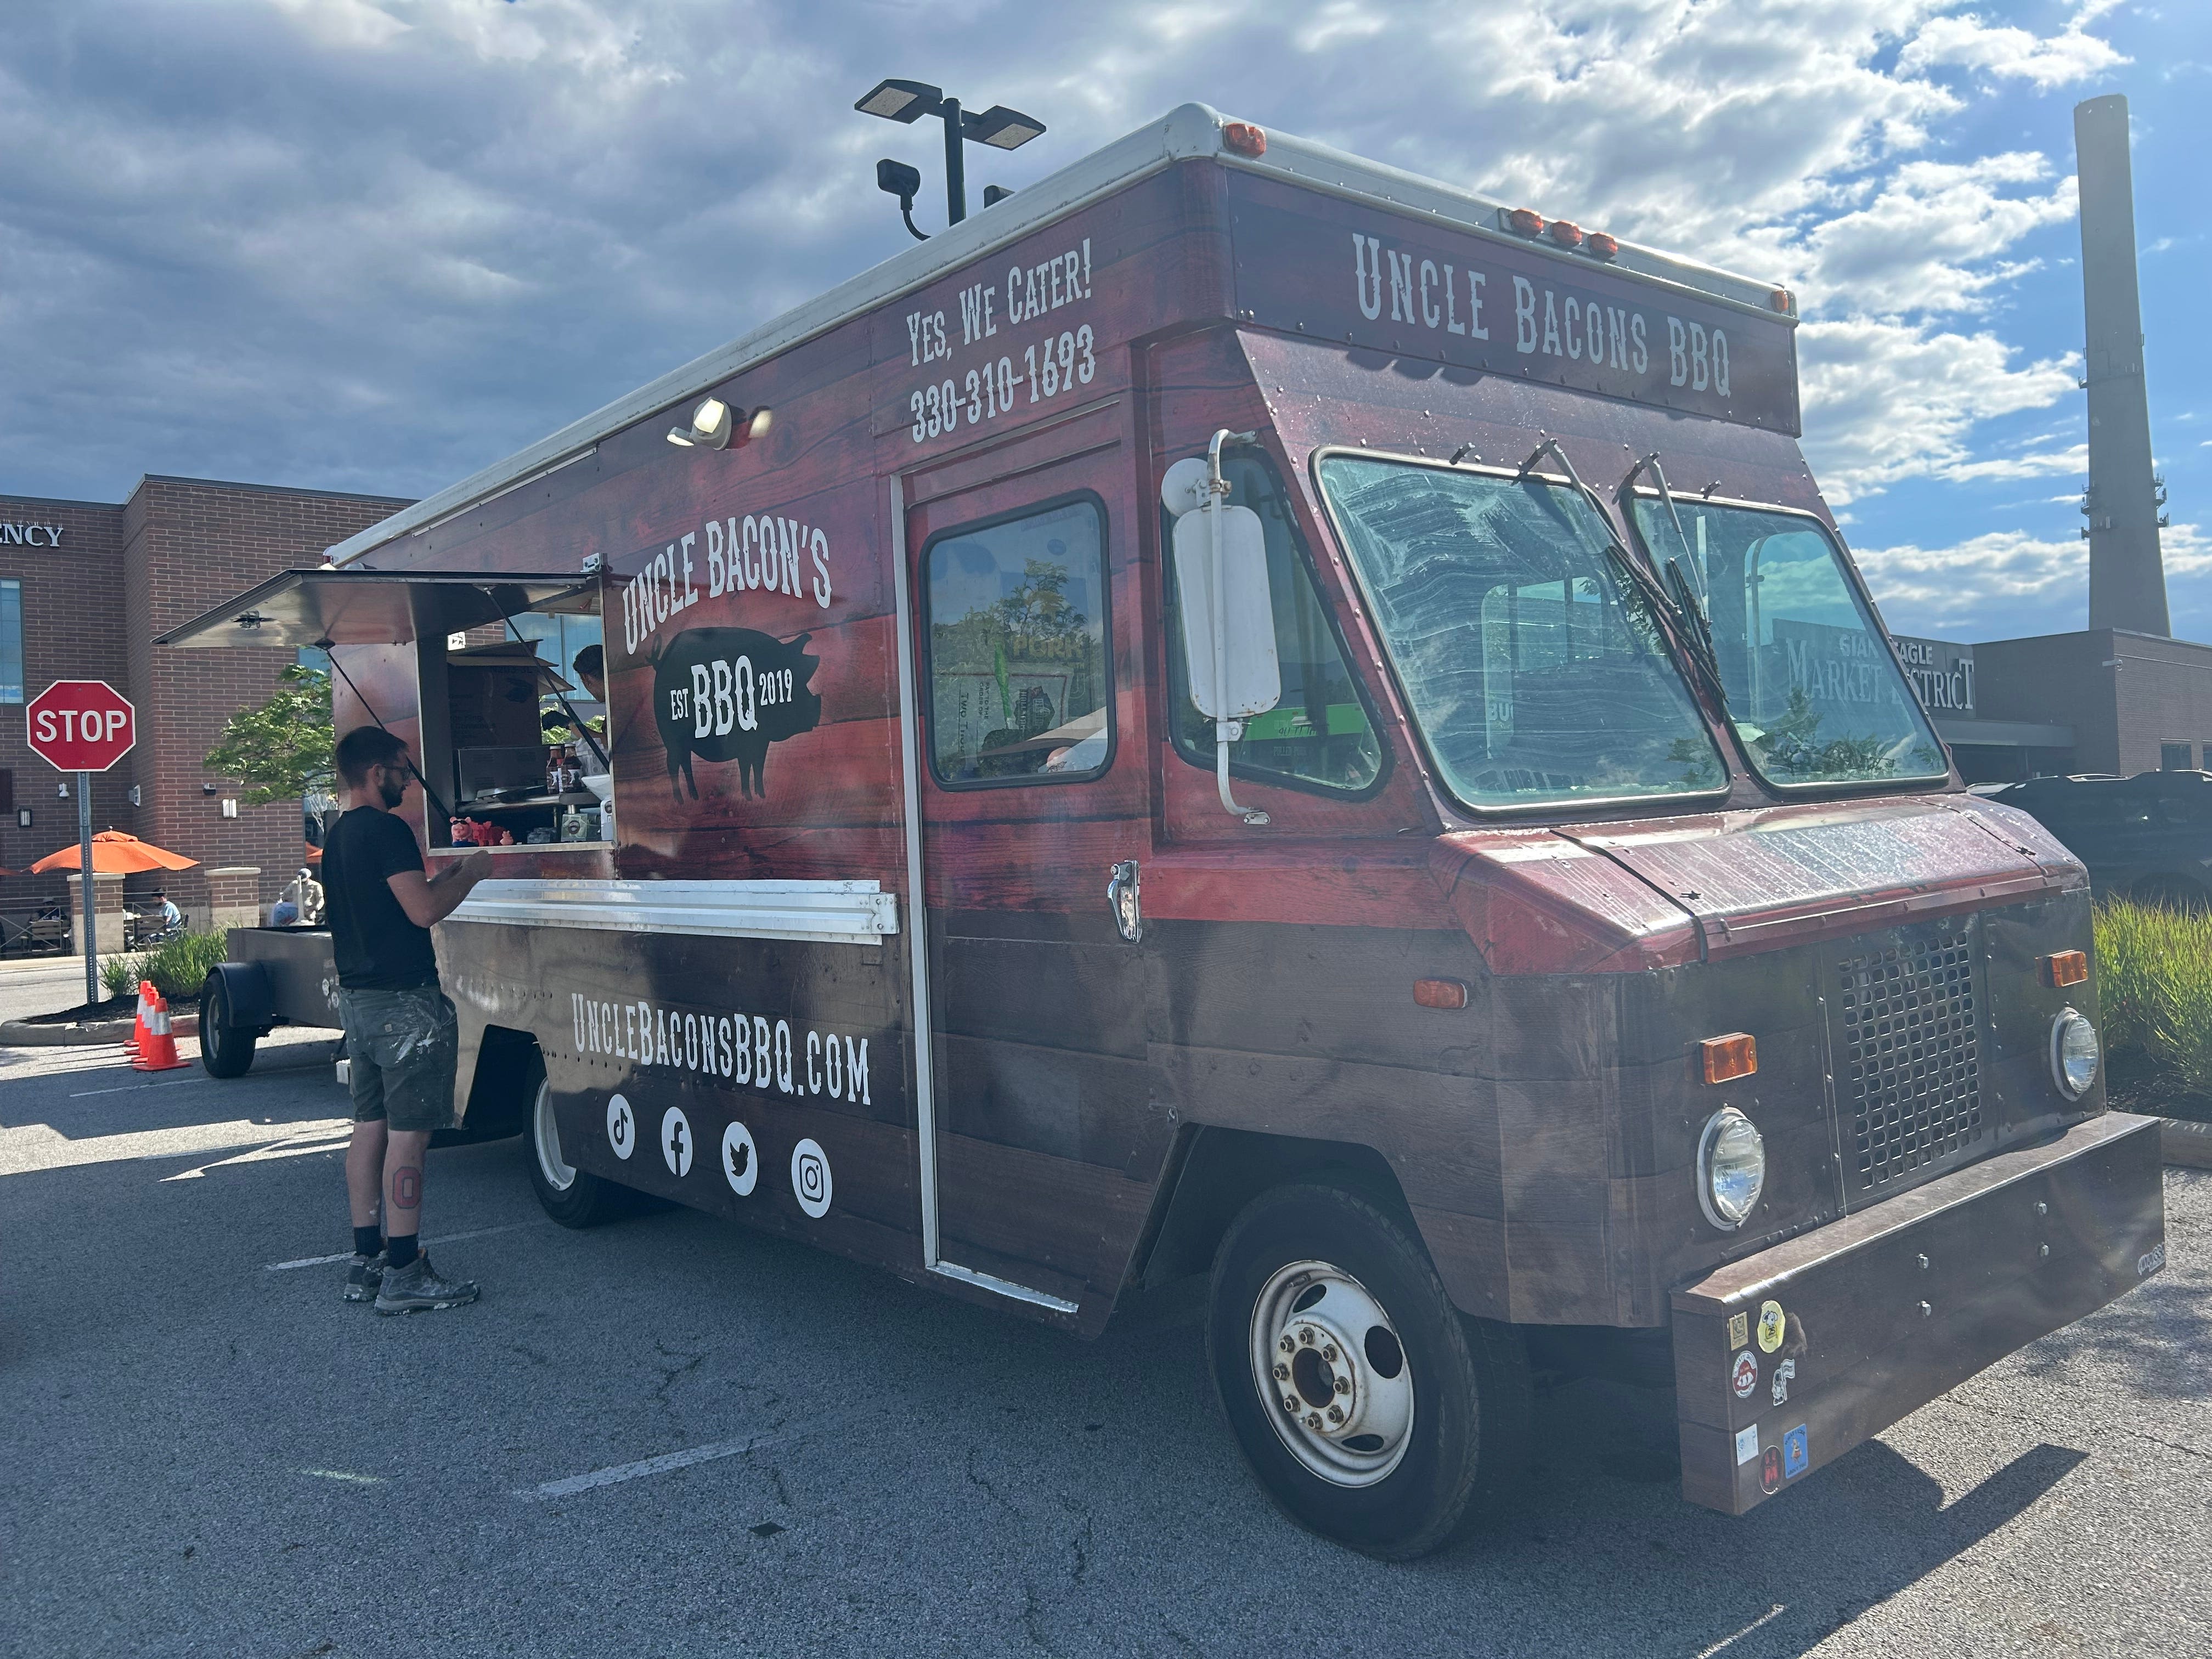 Try Pig Shots, BBQ parfait, smoked mac at Uncle Bacon's truck | Local Flavor on Wheels